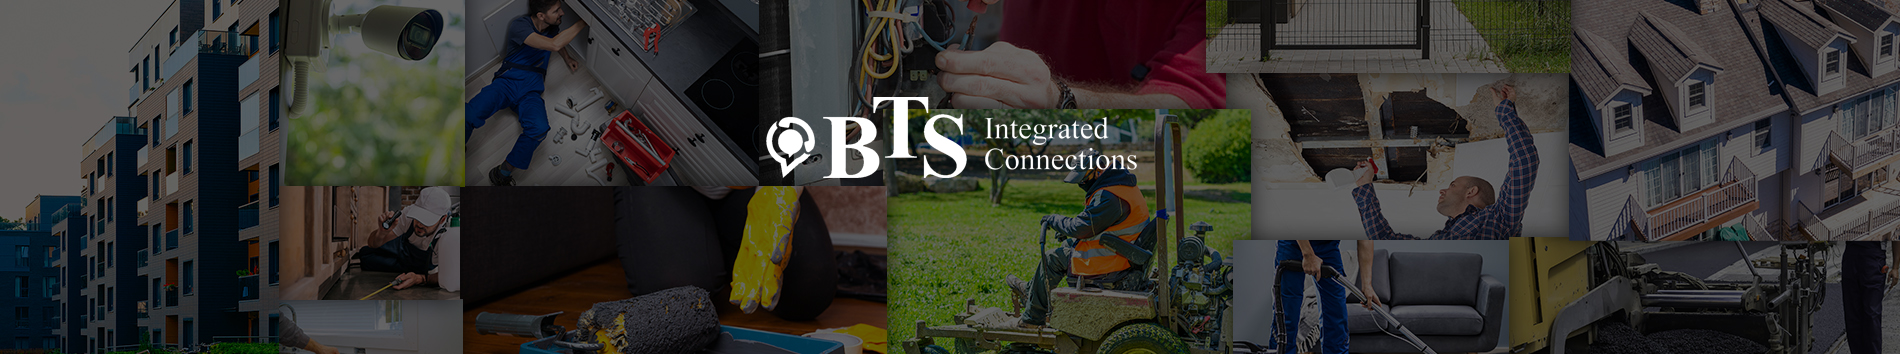 BTS Integrated (Business Technology Solutions)